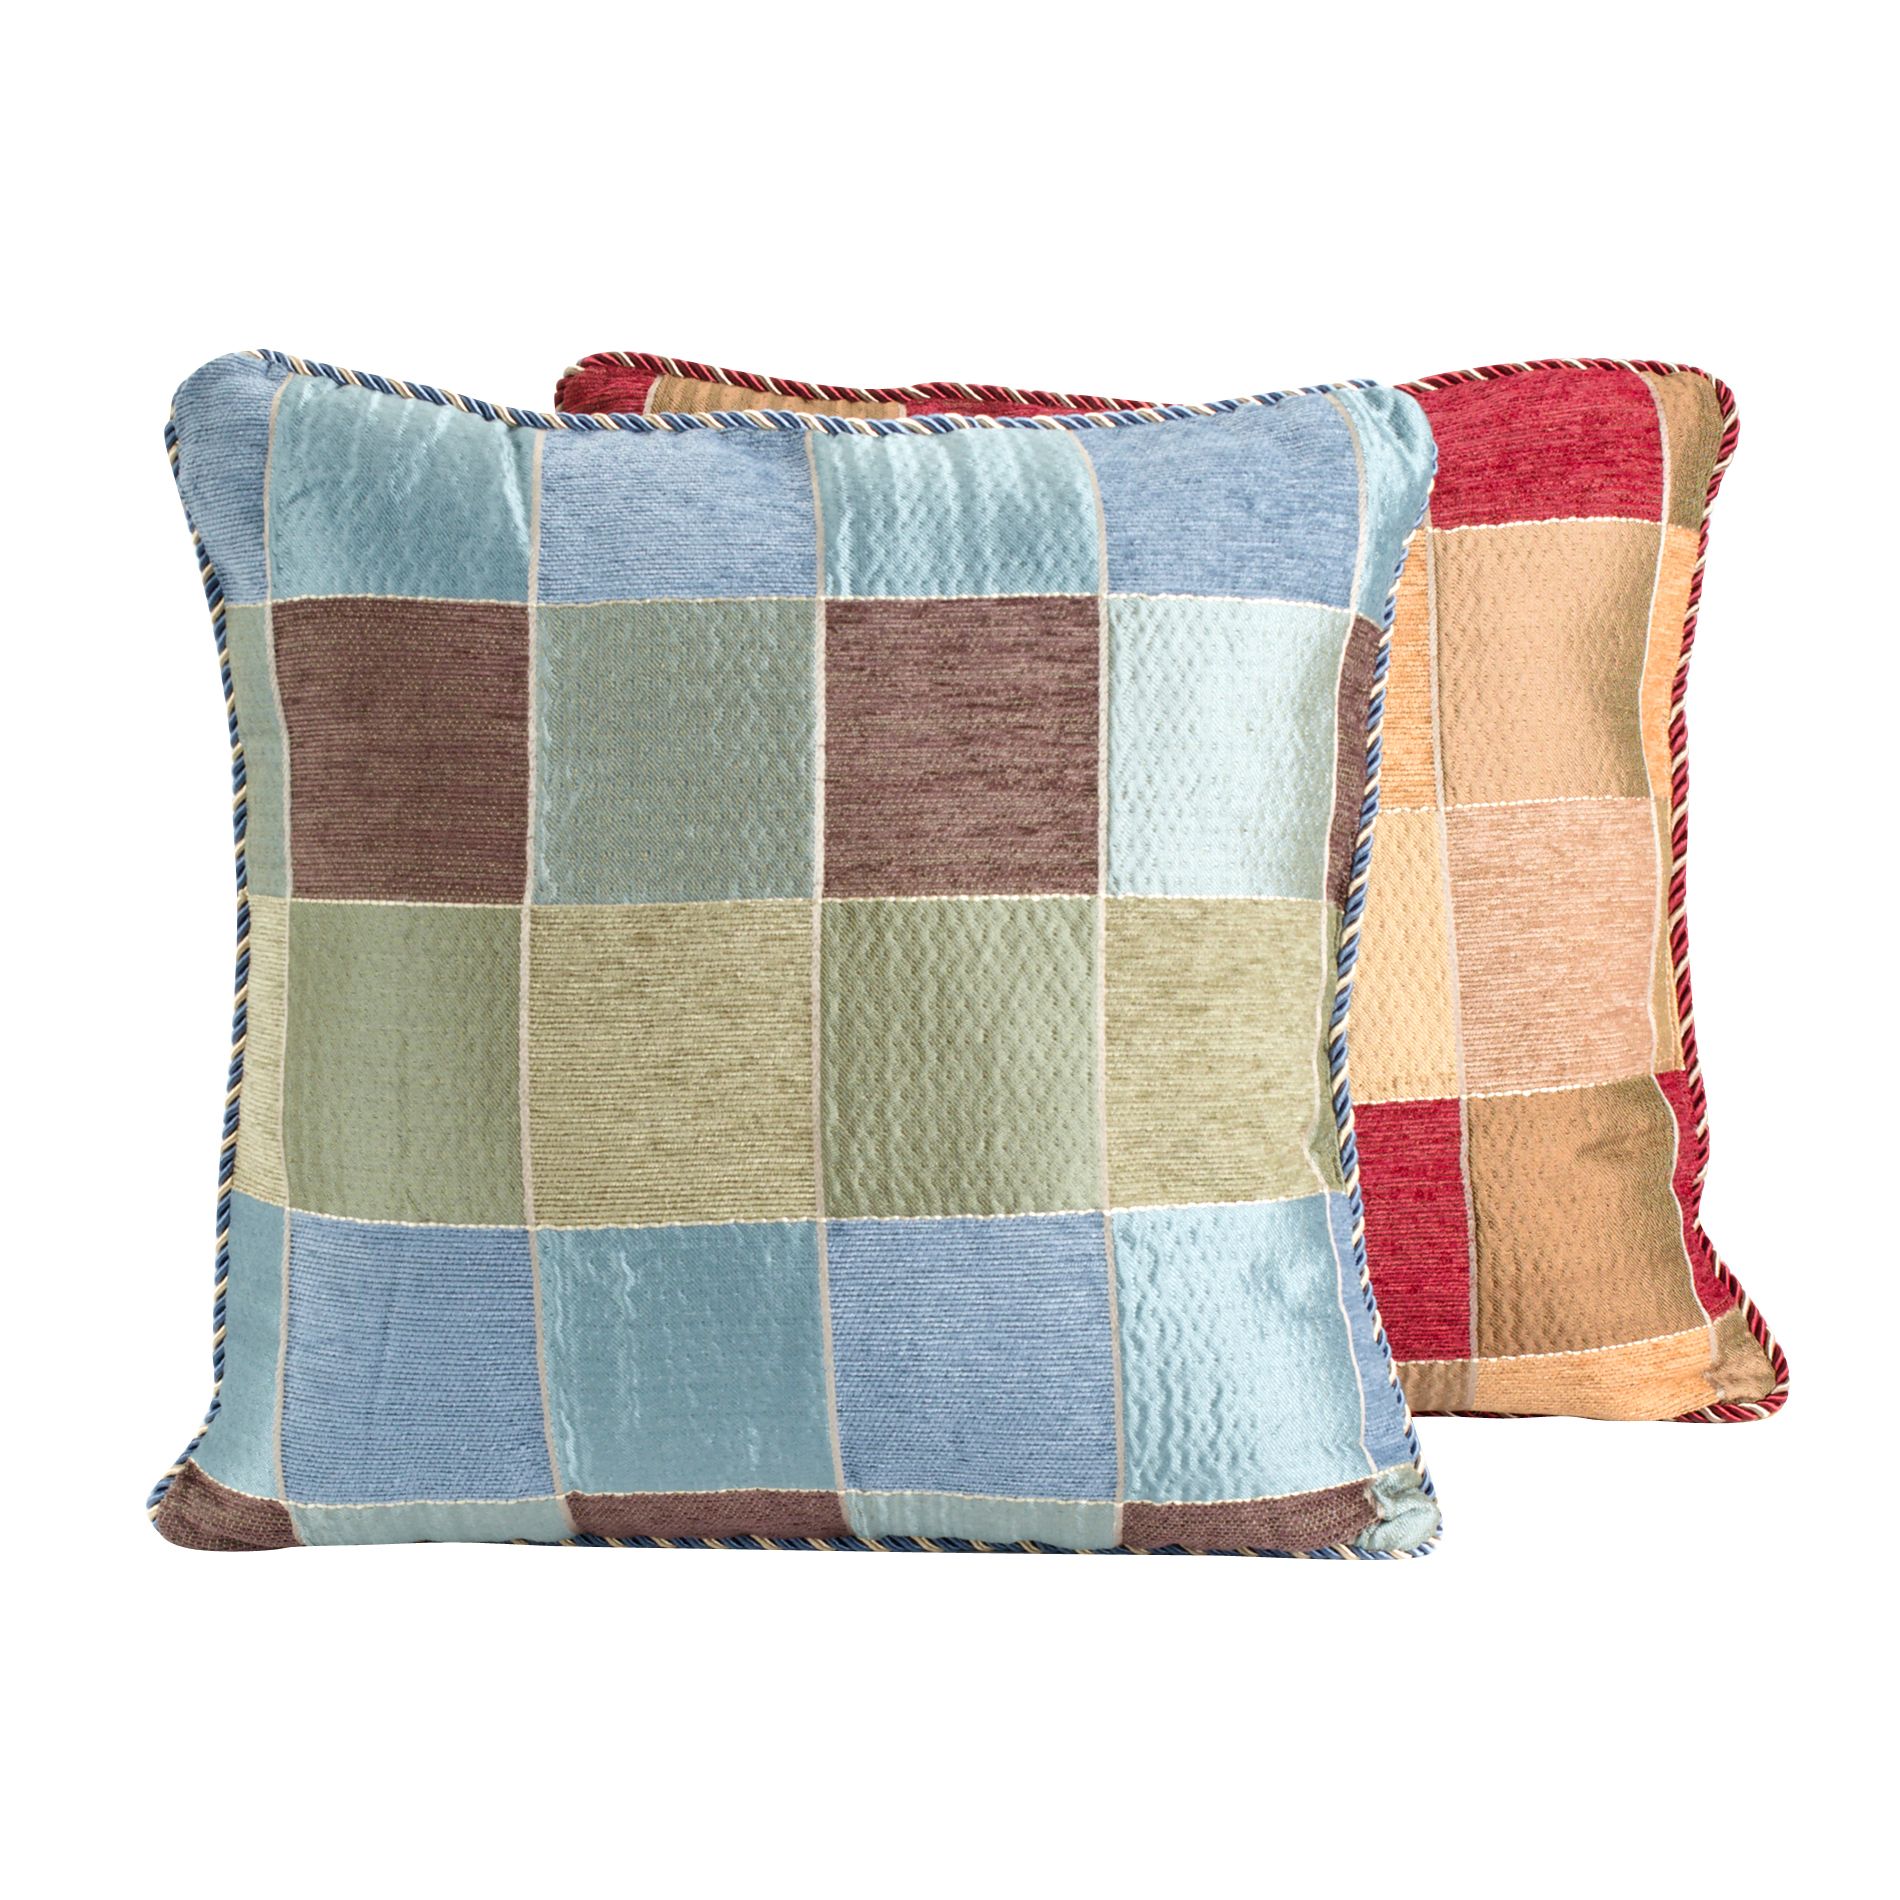 Chenille Block Decorative Pillow With Braided Trim